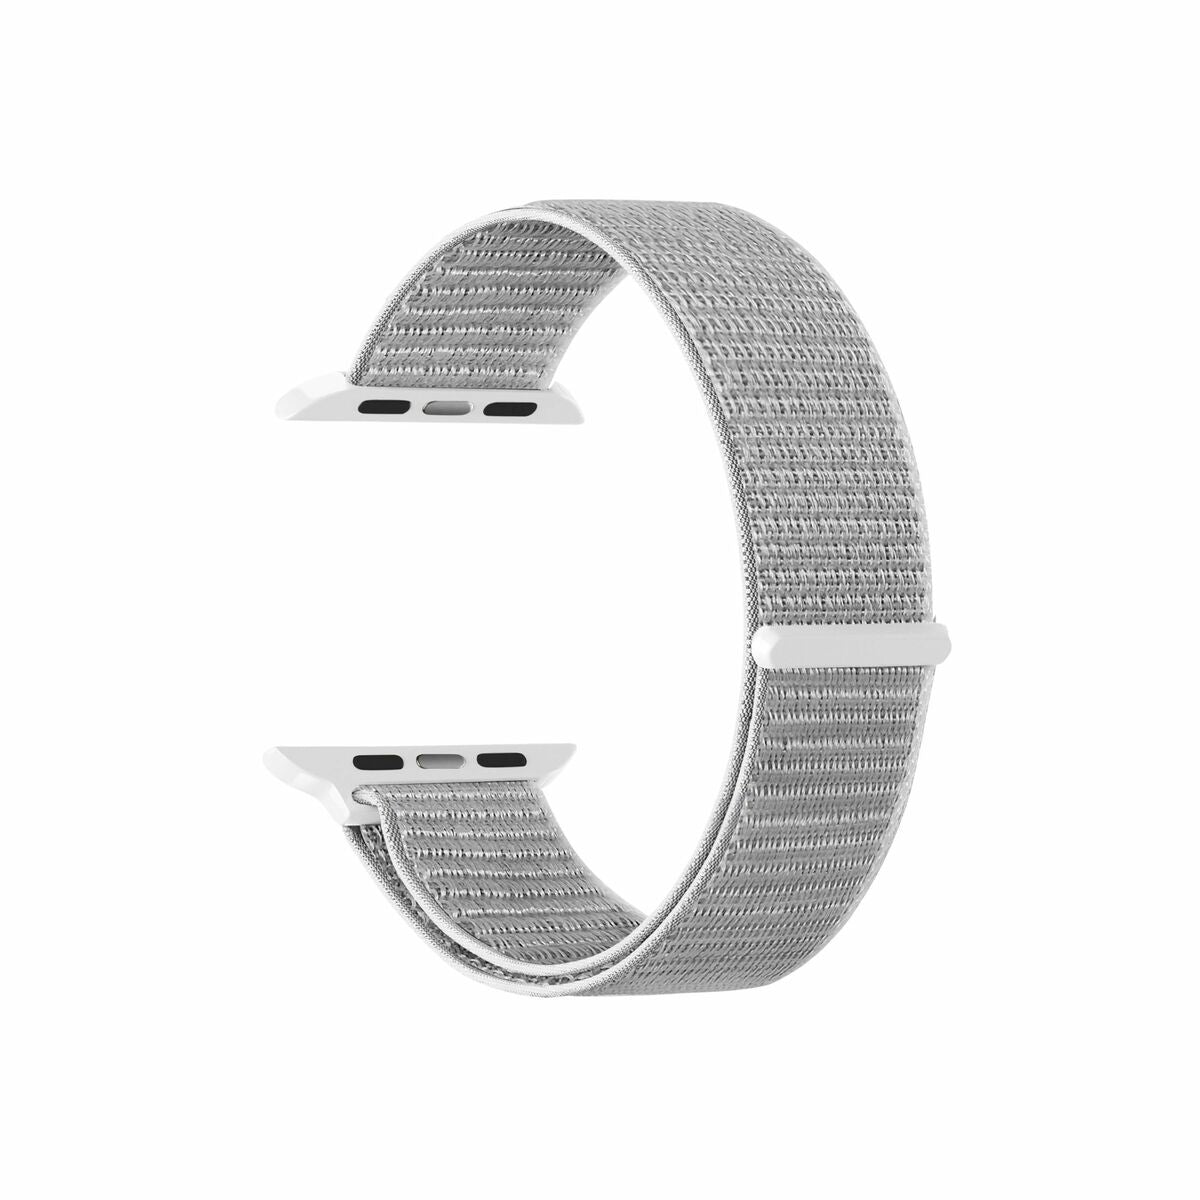 Watch Strap KSIX Apple Watch/Urban, KSIX, Sports and outdoors, Electronics and devices, watch-strap-ksix-apple-watch-urban-10, Brand_KSIX, category-reference-2609, category-reference-2617, category-reference-2634, category-reference-t-19756, category-reference-t-7034, category-reference-t-7035, Condition_NEW, deportista / en forma, original gifts, Price_20 - 50, telephones & tablets, vida sana, RiotNook